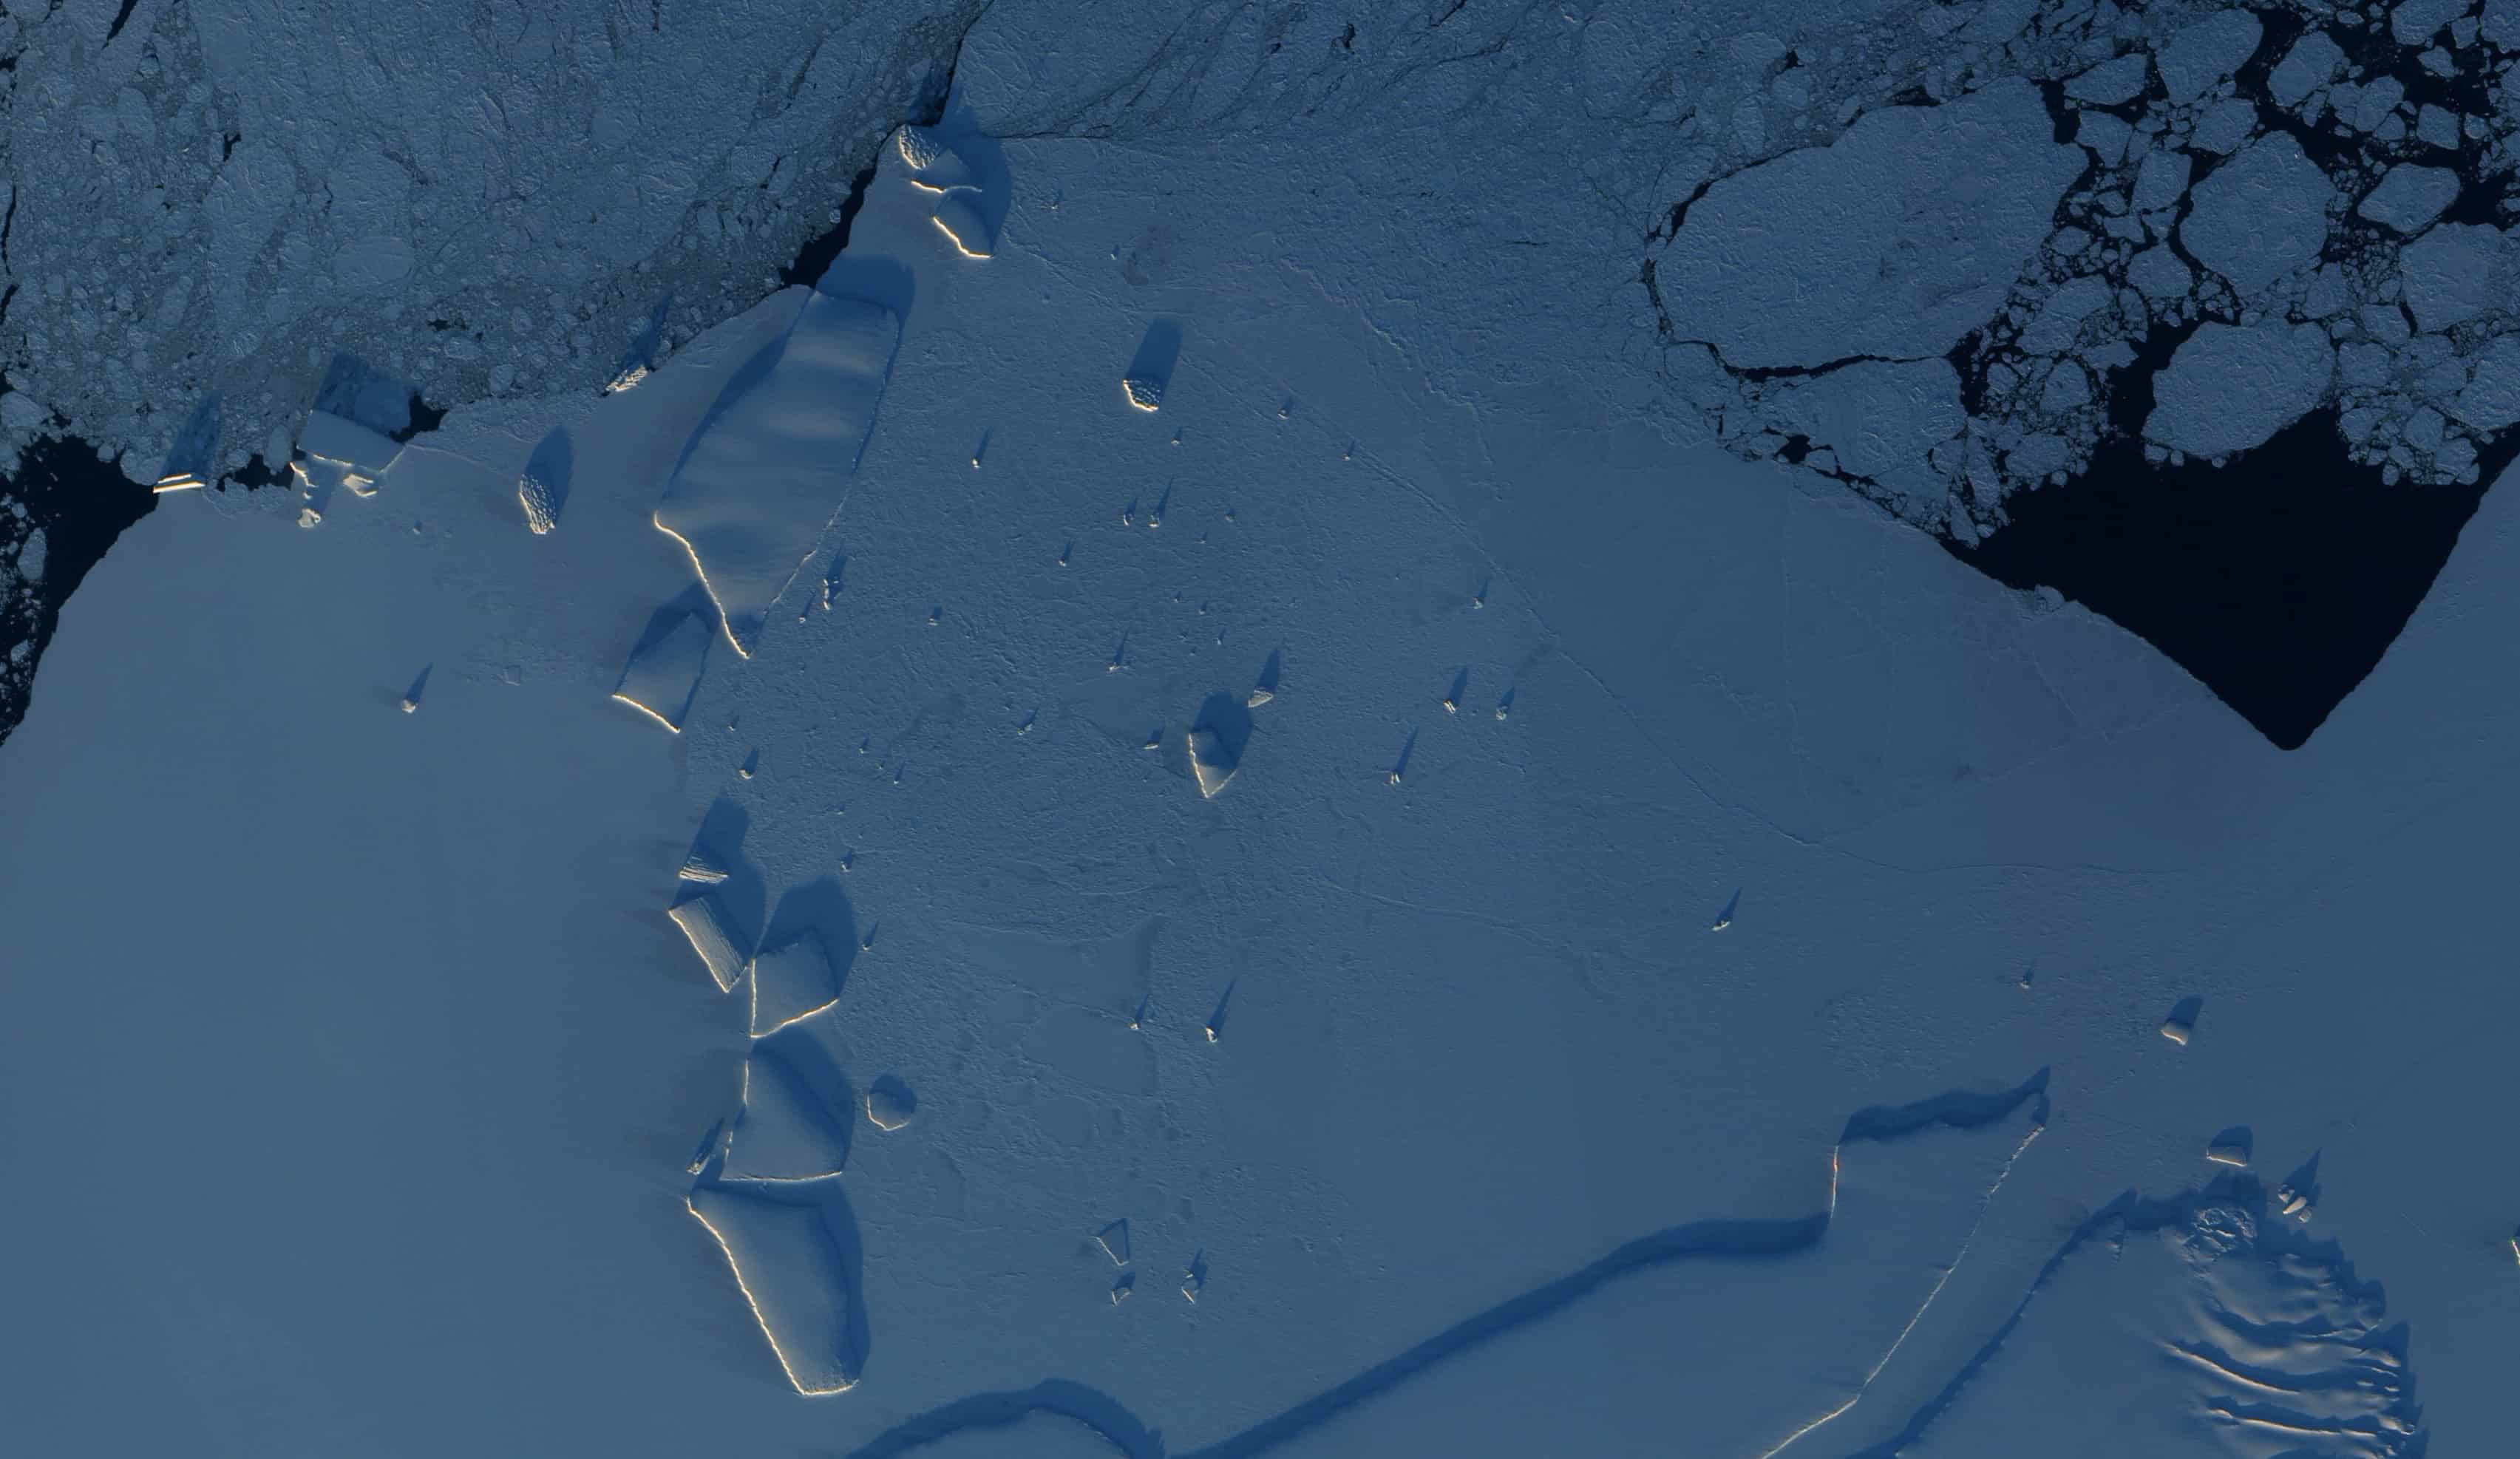 The East Antarctic coastline as seen from space.